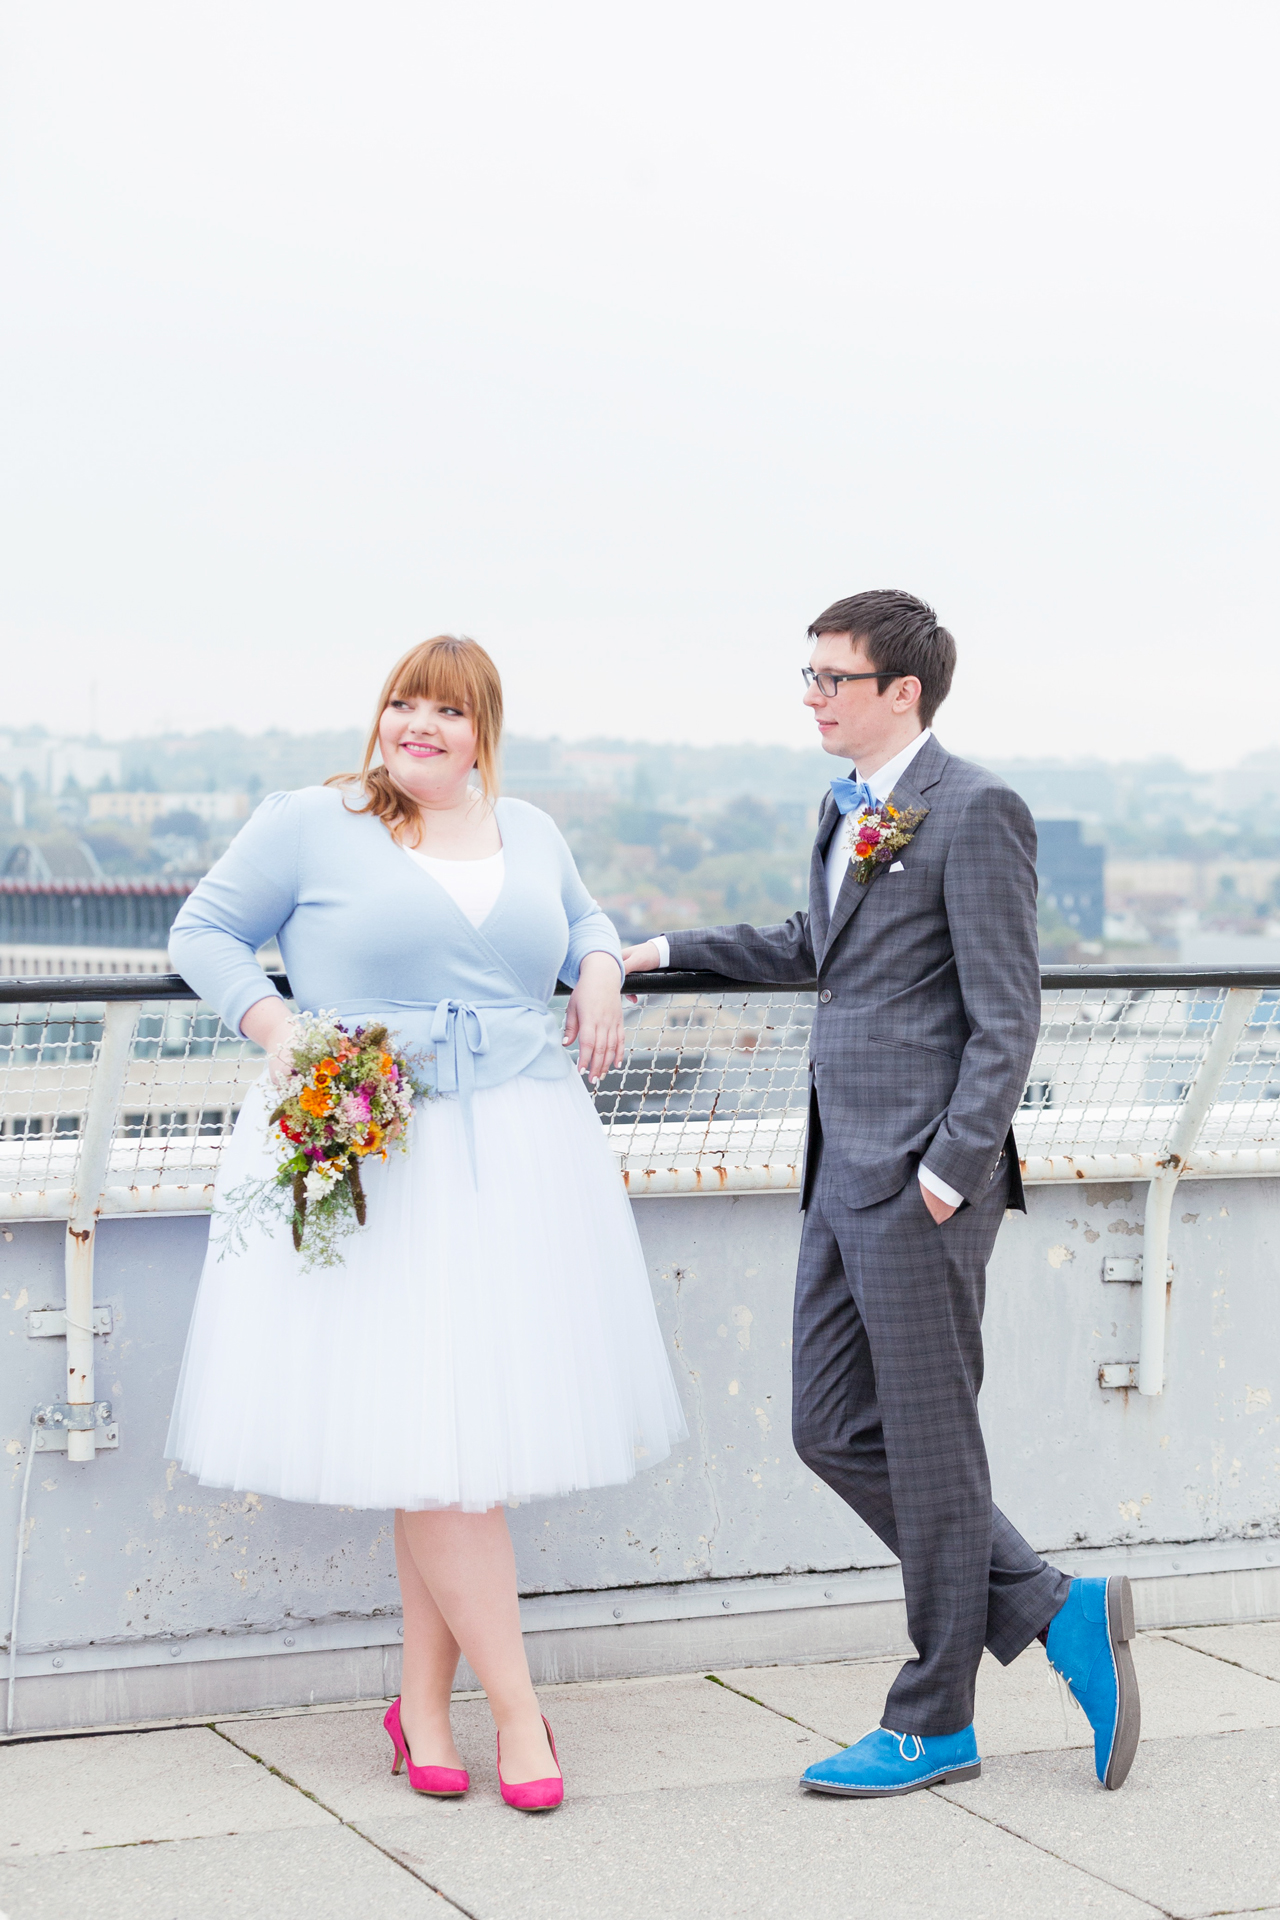 Tulle skirt and dusty blue sweater for good luck. Loving the pop of color with her pink shoes. // See more: 20 Stunning Civil Wedding Outfit Ideas to Make it Official In Style. // mysweetengagement.com